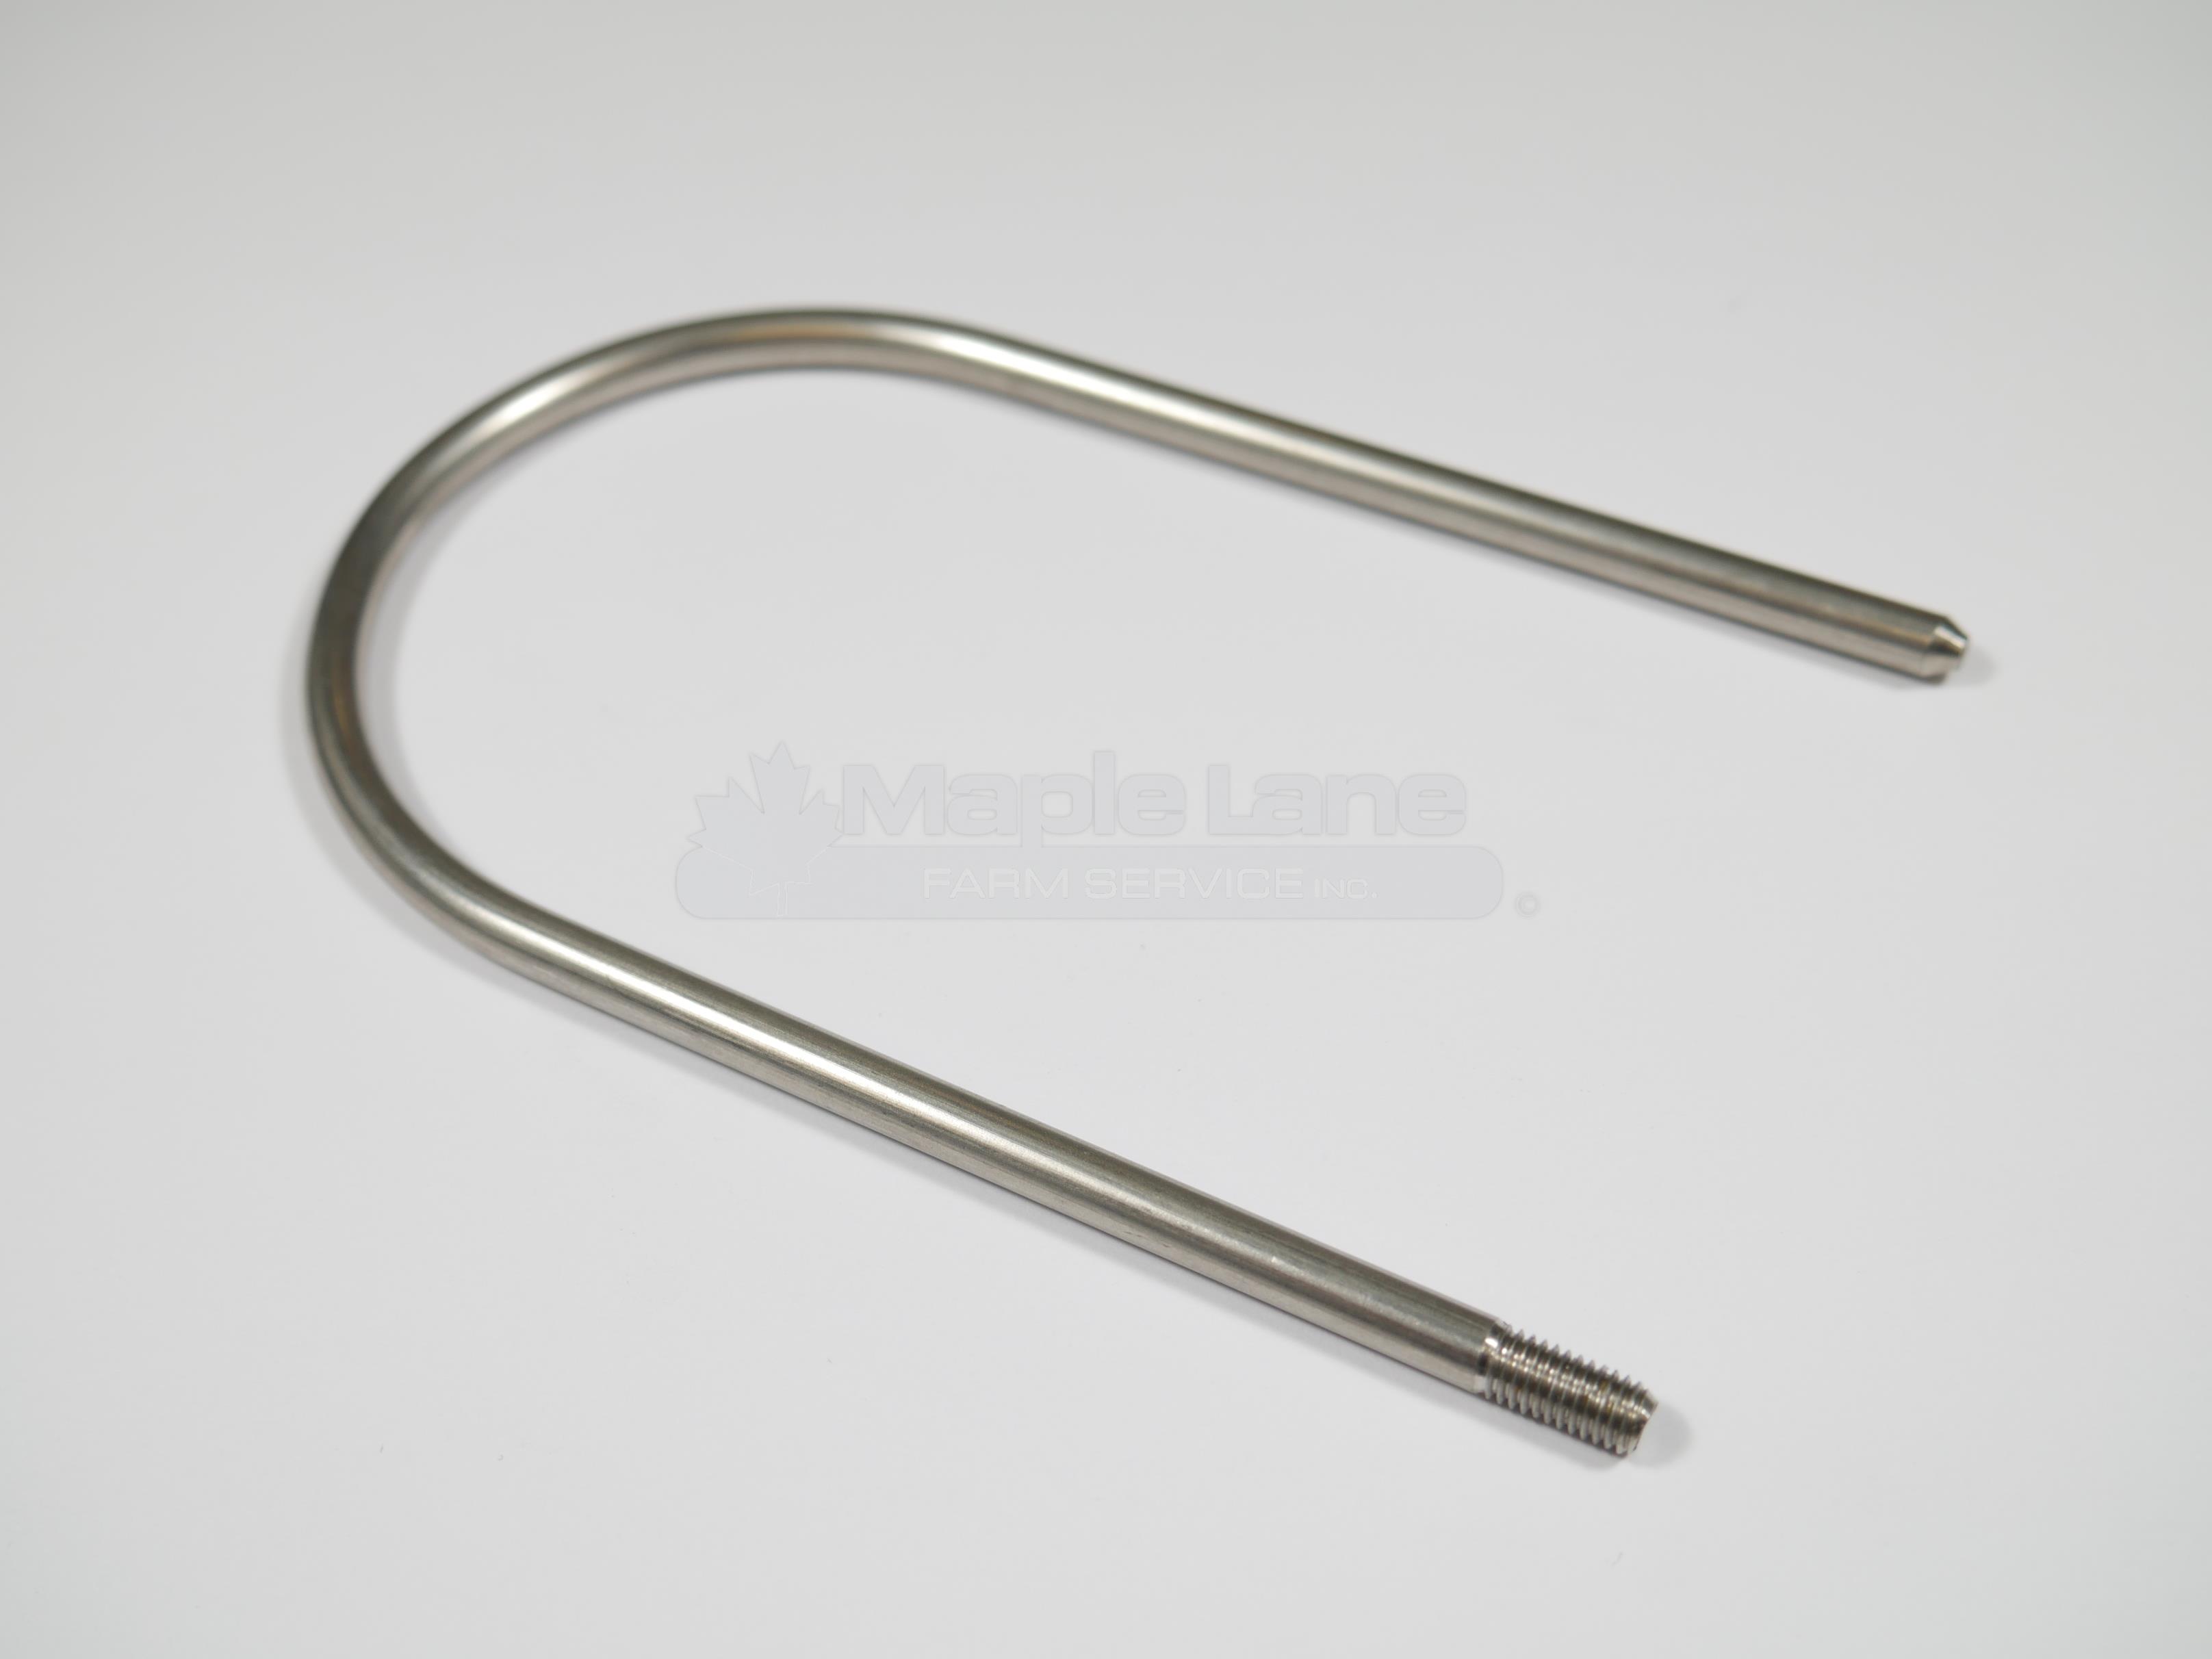 147774 s-93 fork with m5 threads